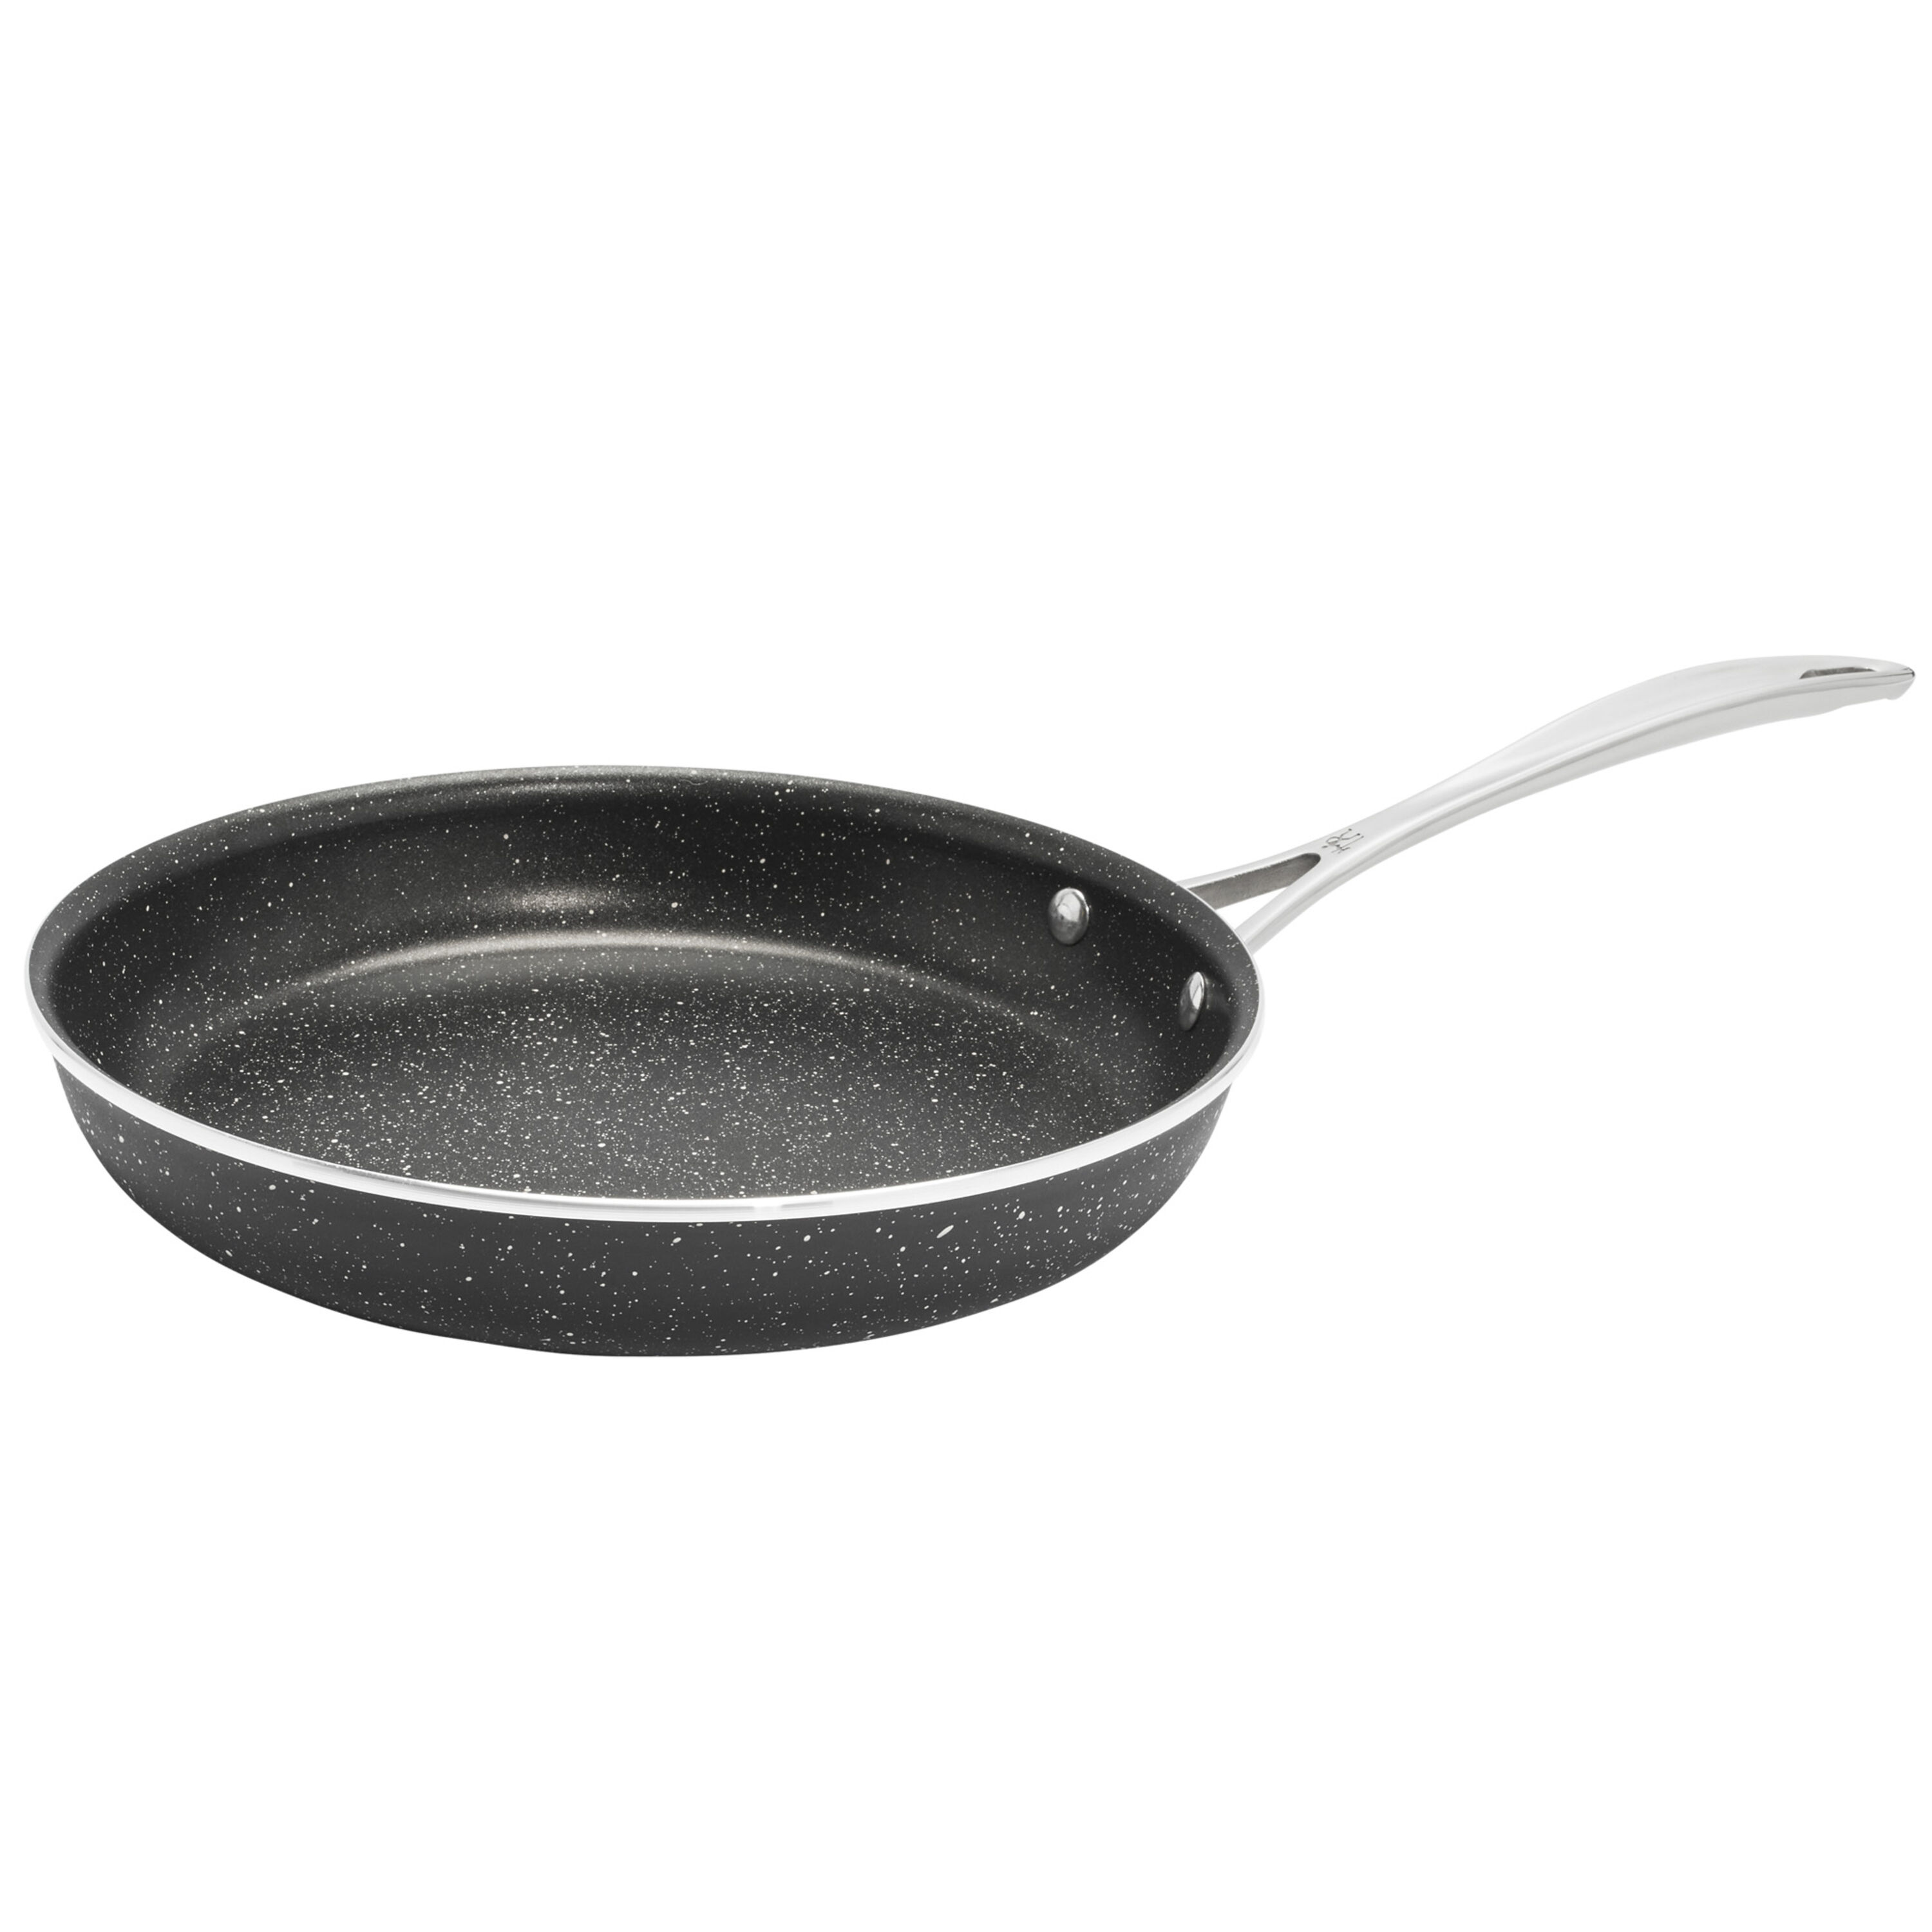 Heritage Rock covered frying pan reviews in Kitchen Accessories